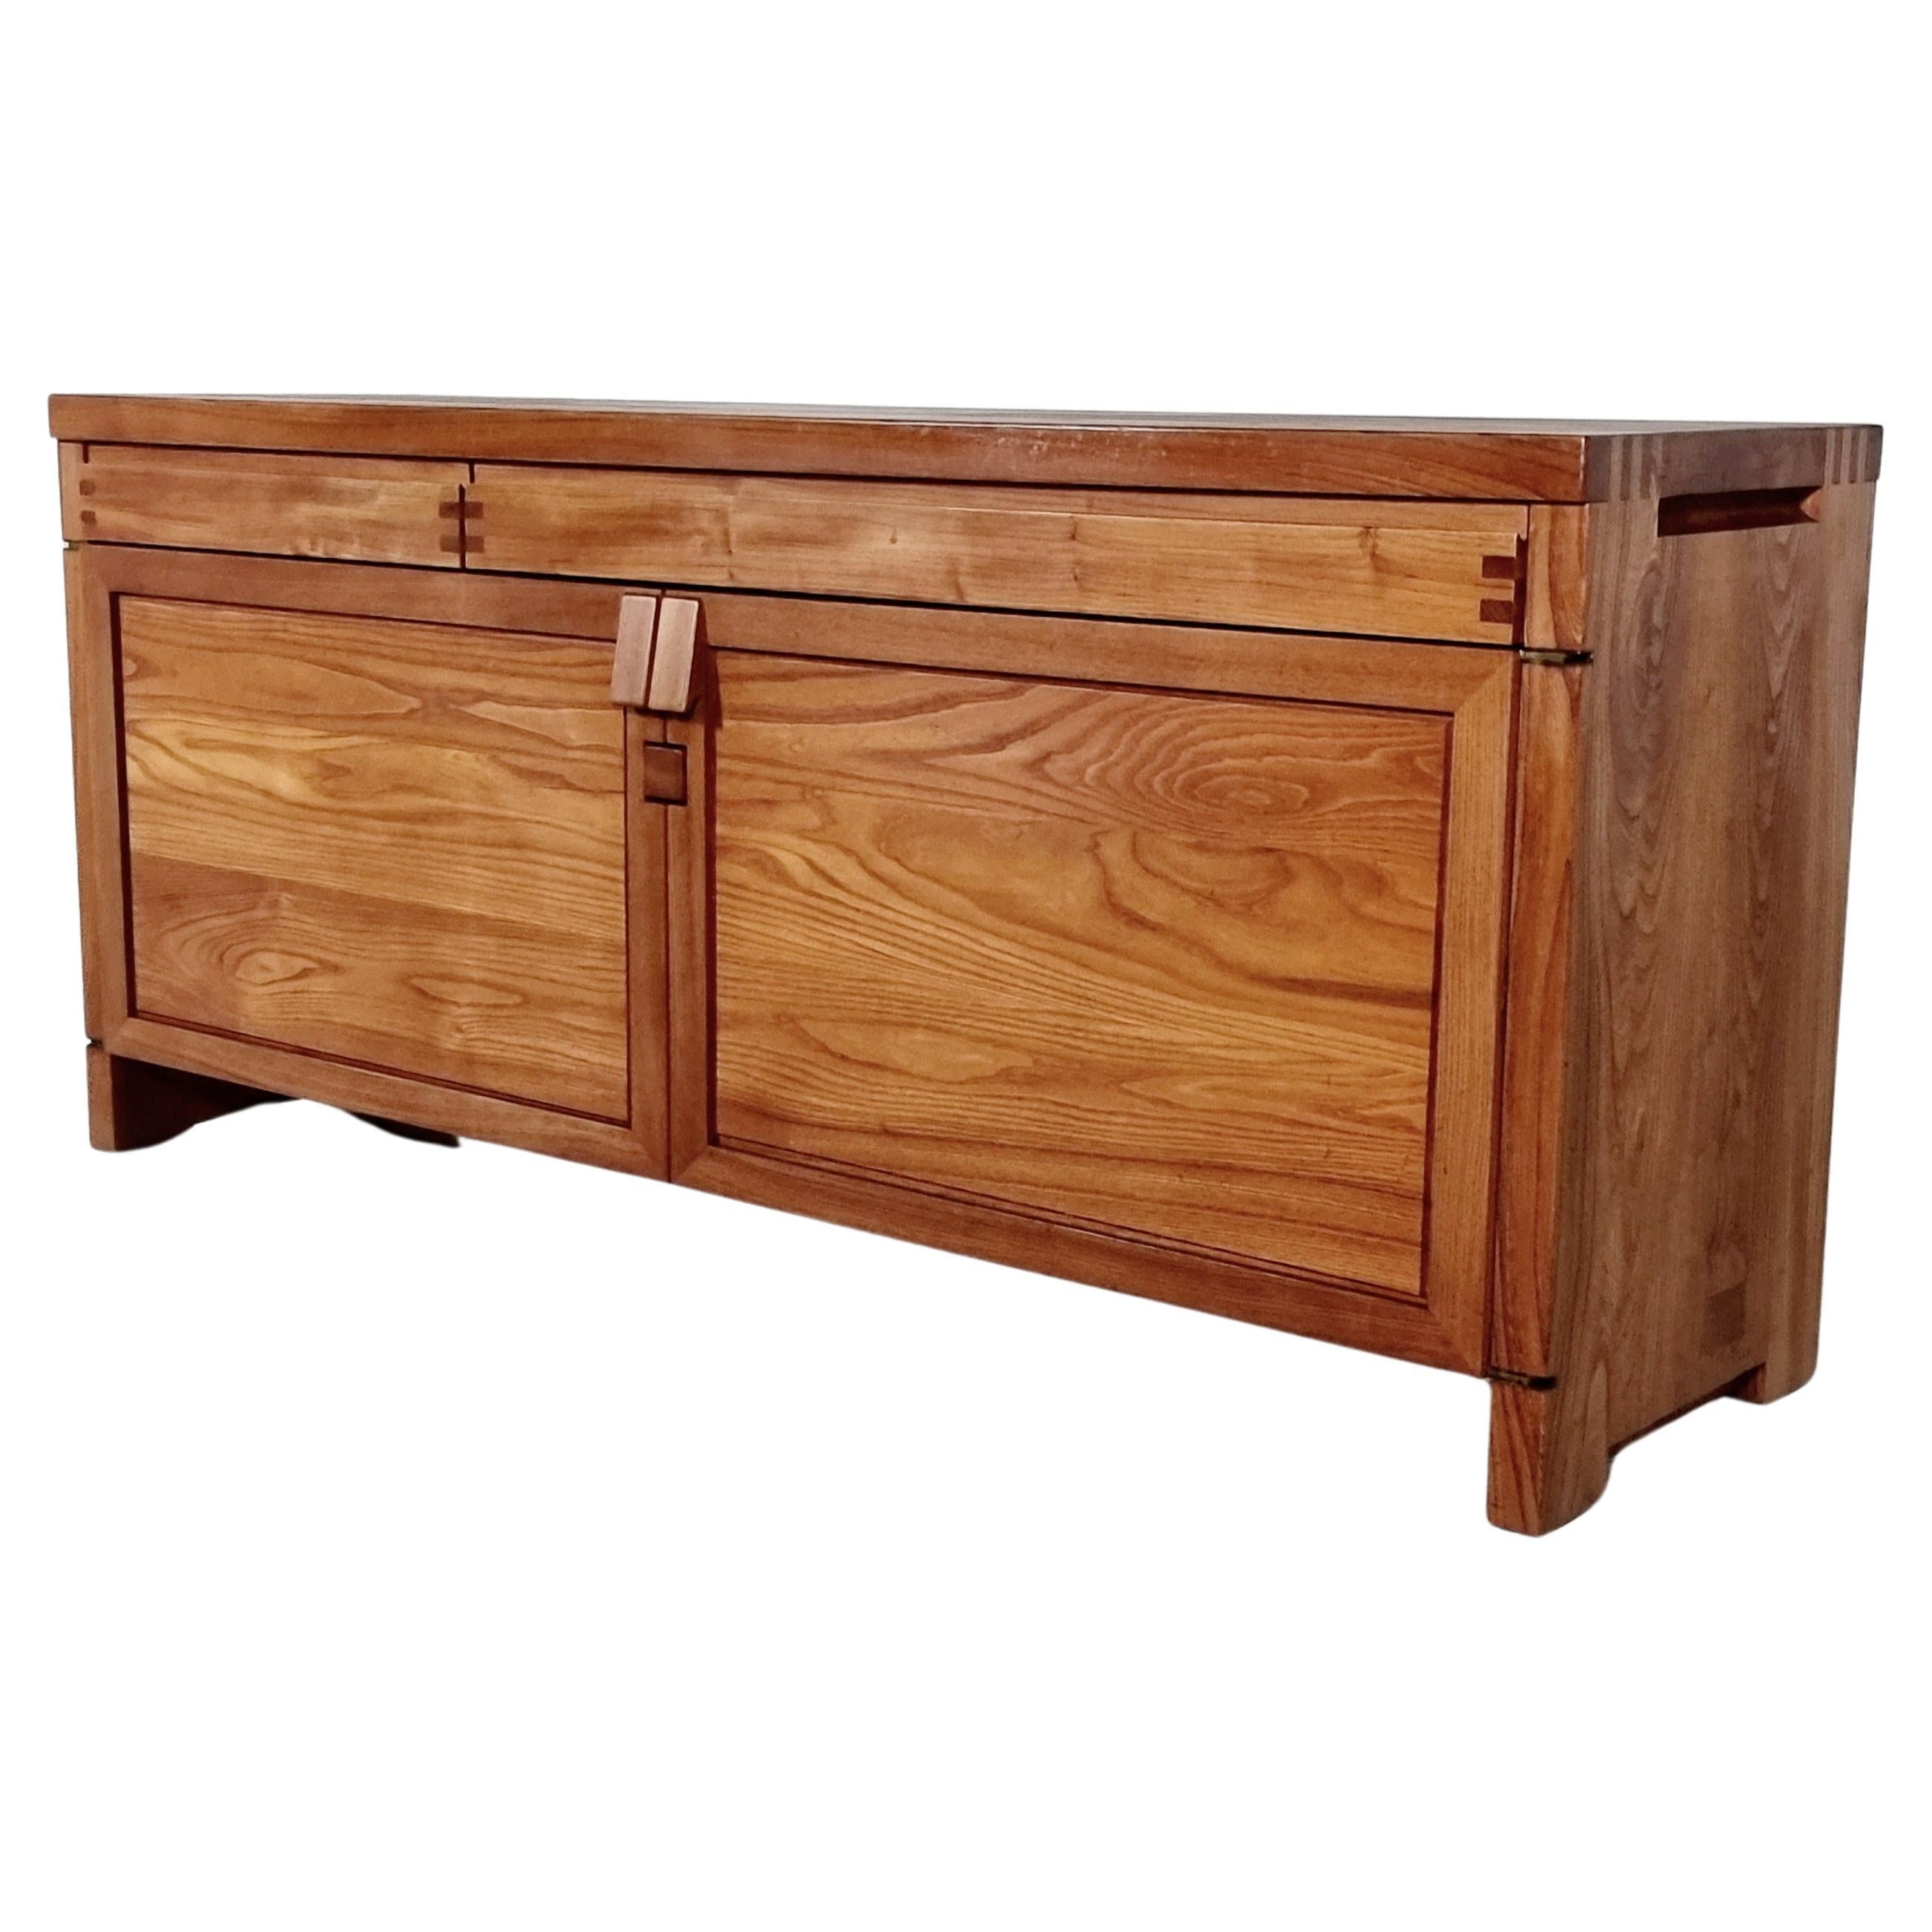 Pierre Chapo, sideboard, Model R08, elm, France, circa 1964.

This stunning credenza combines a simplified yet complex design with nifty, solid construction details that characterize Chapo's work. The well-proportioned doors and drawers are